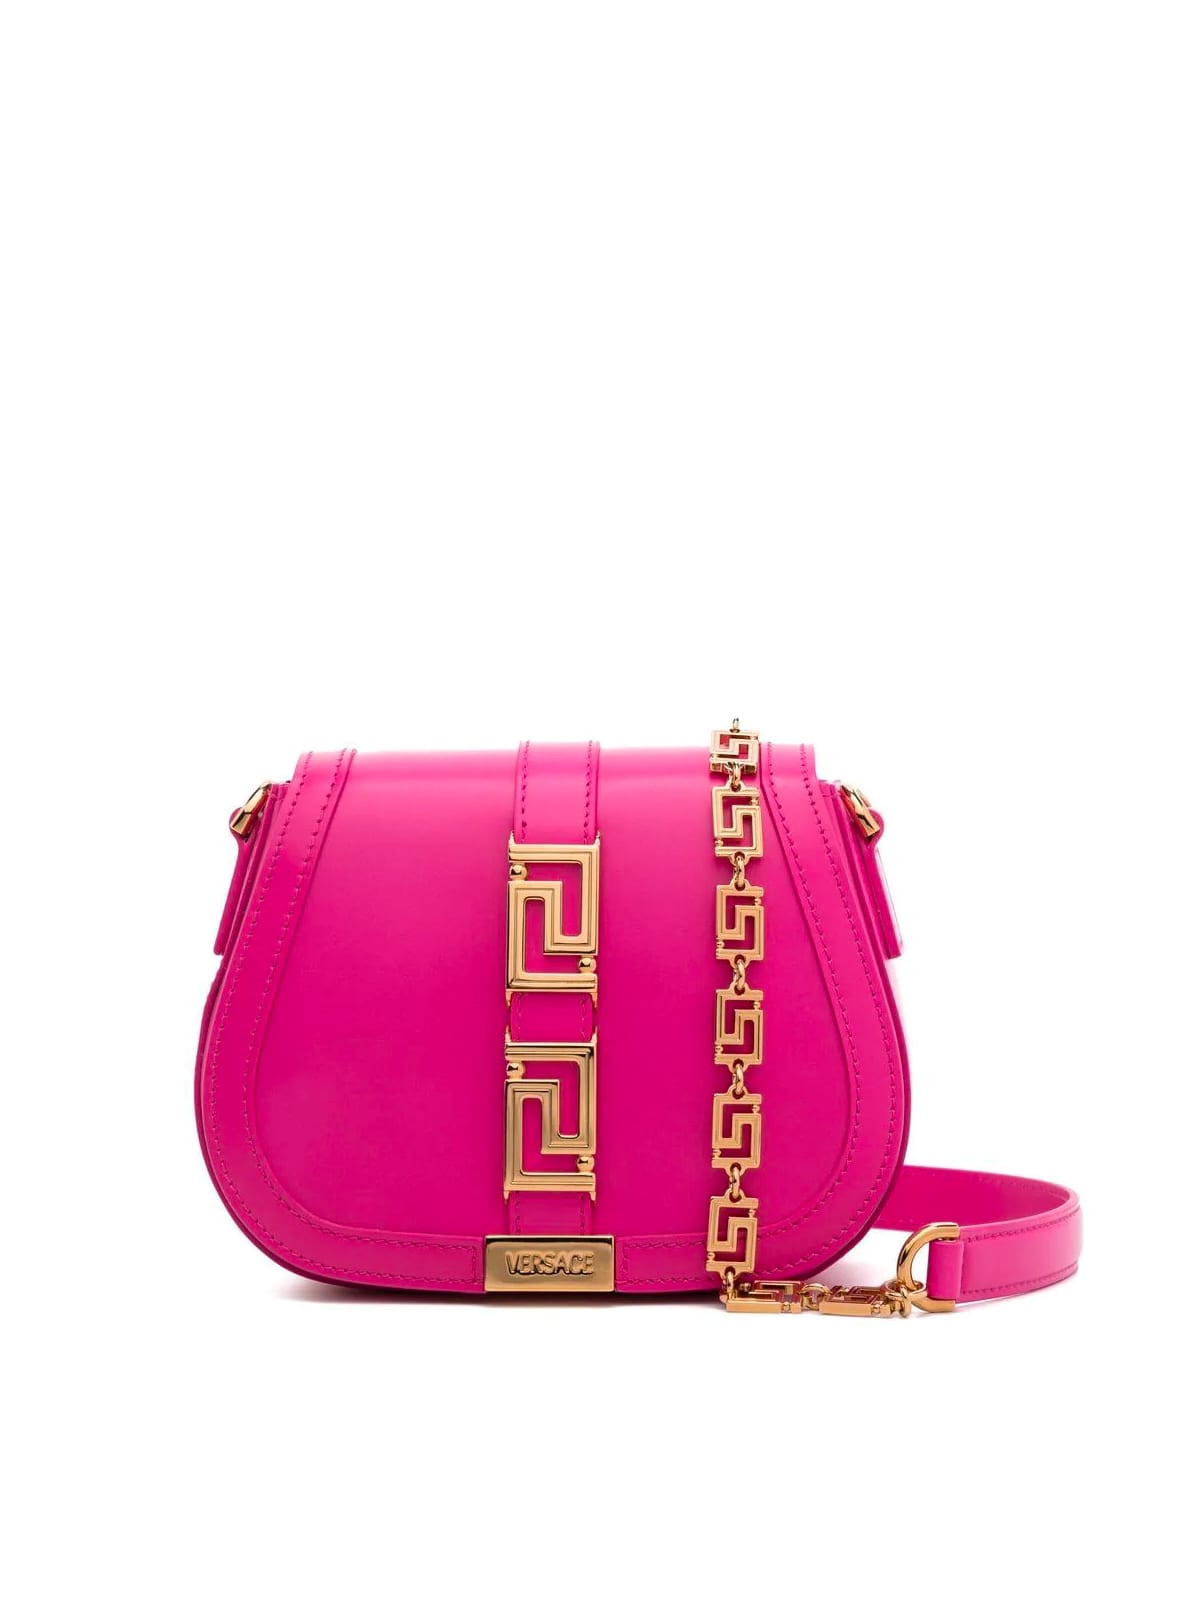 VERSACE SMALL SHOULDER CALF LEATHER BAG